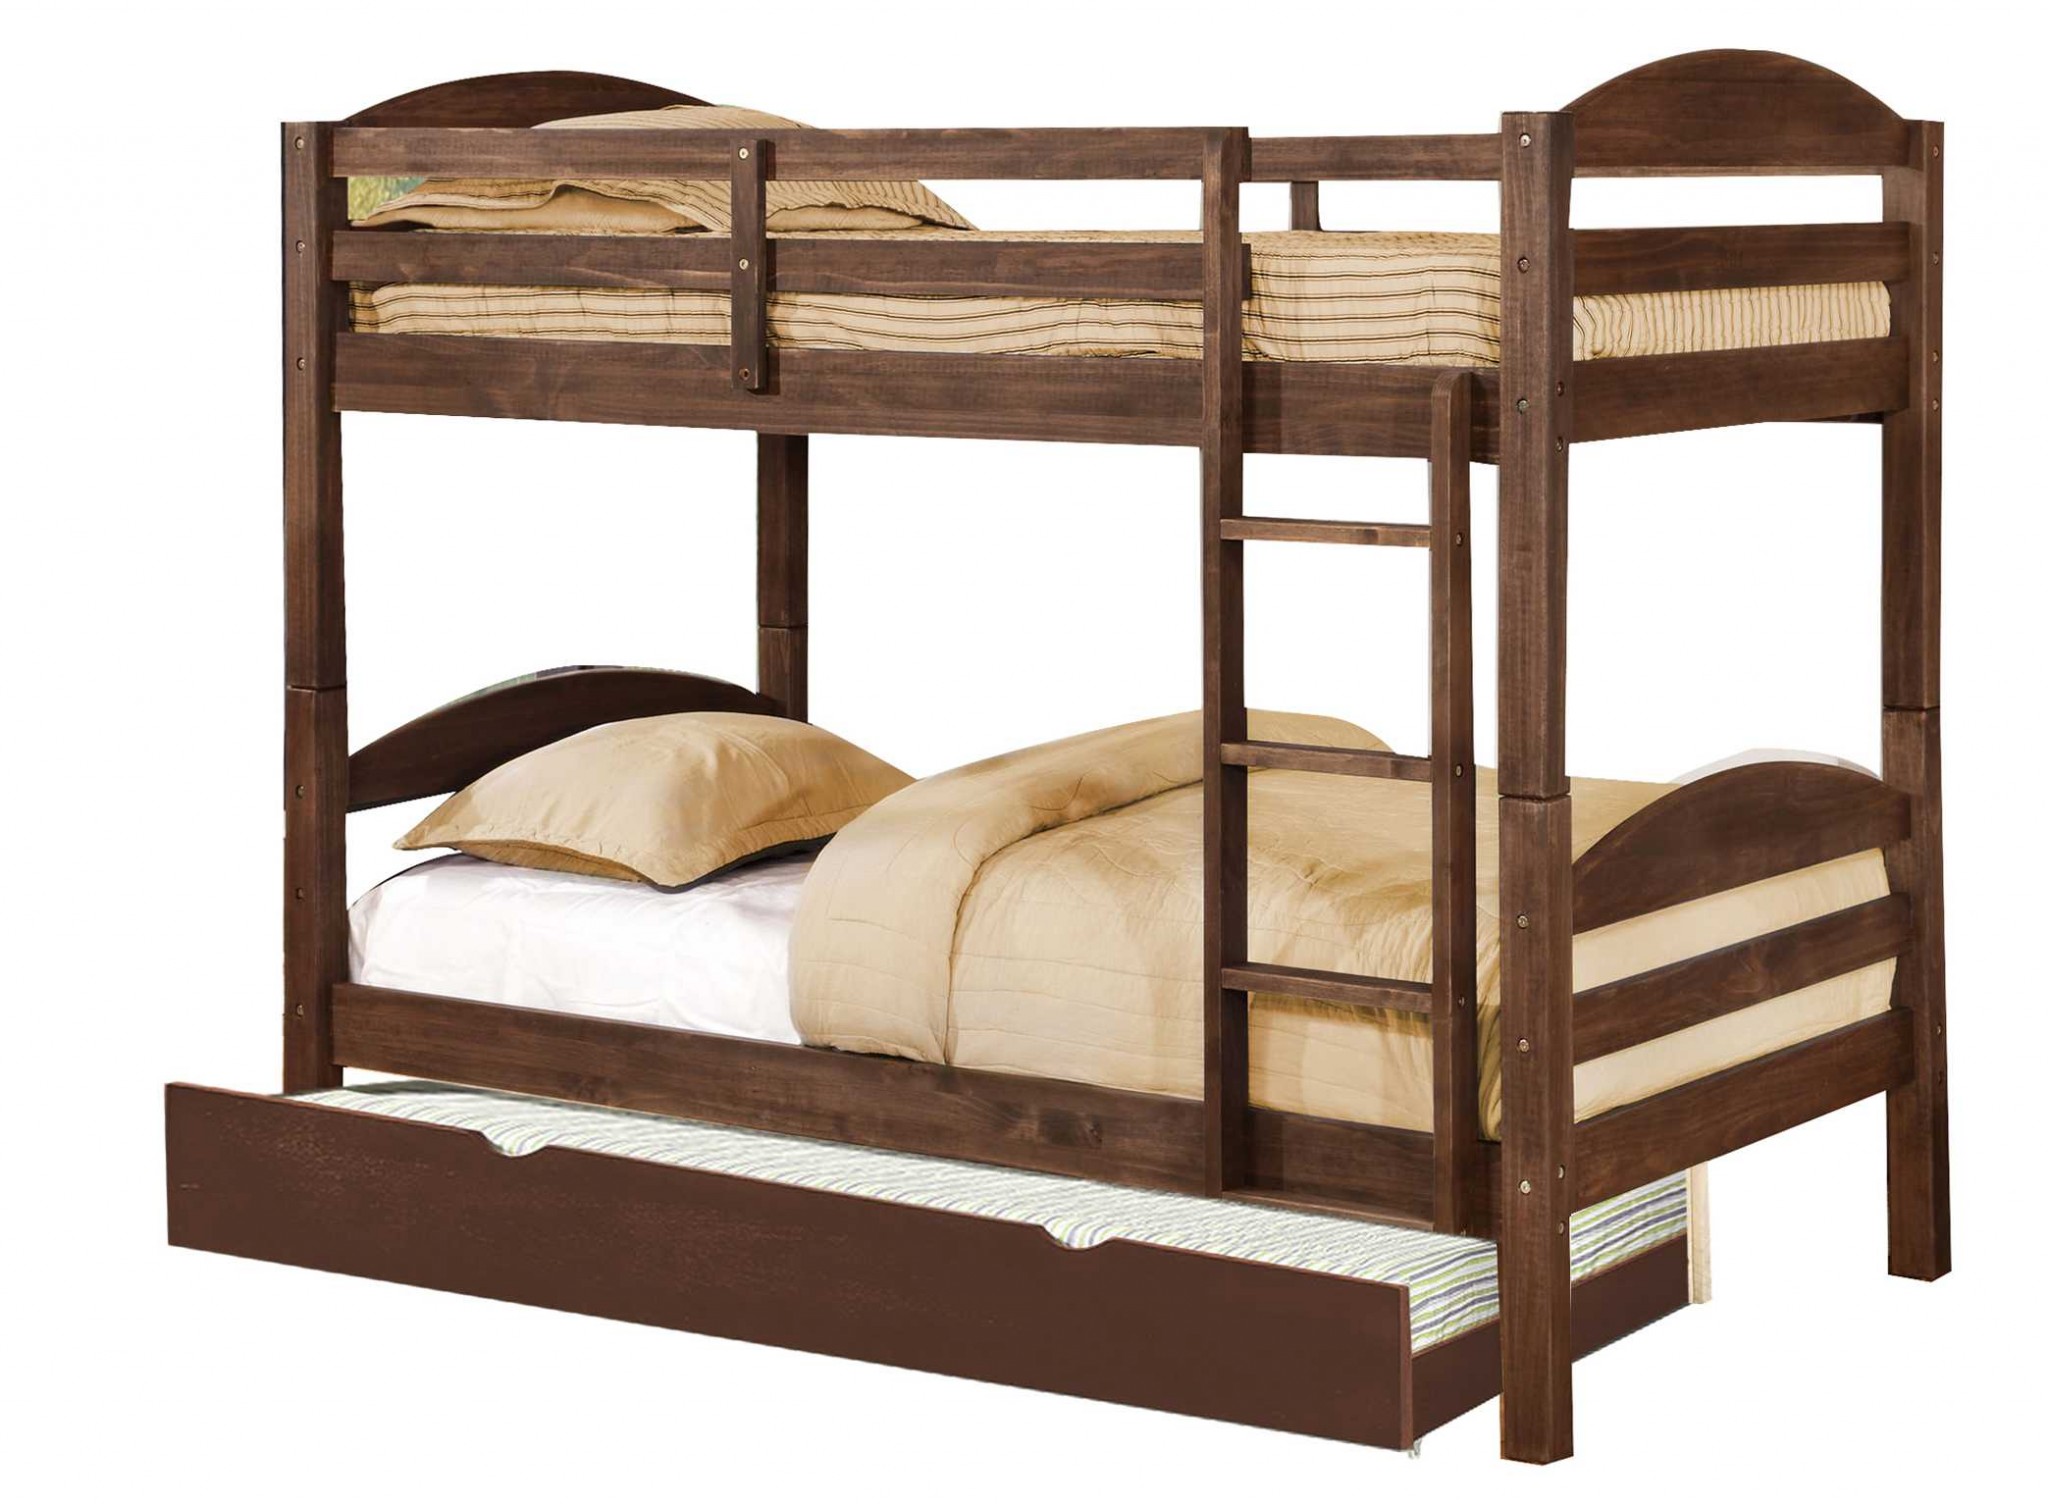 81" X 42.5" X 64.75" Brown Solid and Manufactured Wood Twin or Twin Bunk Bed with Matching Trundle